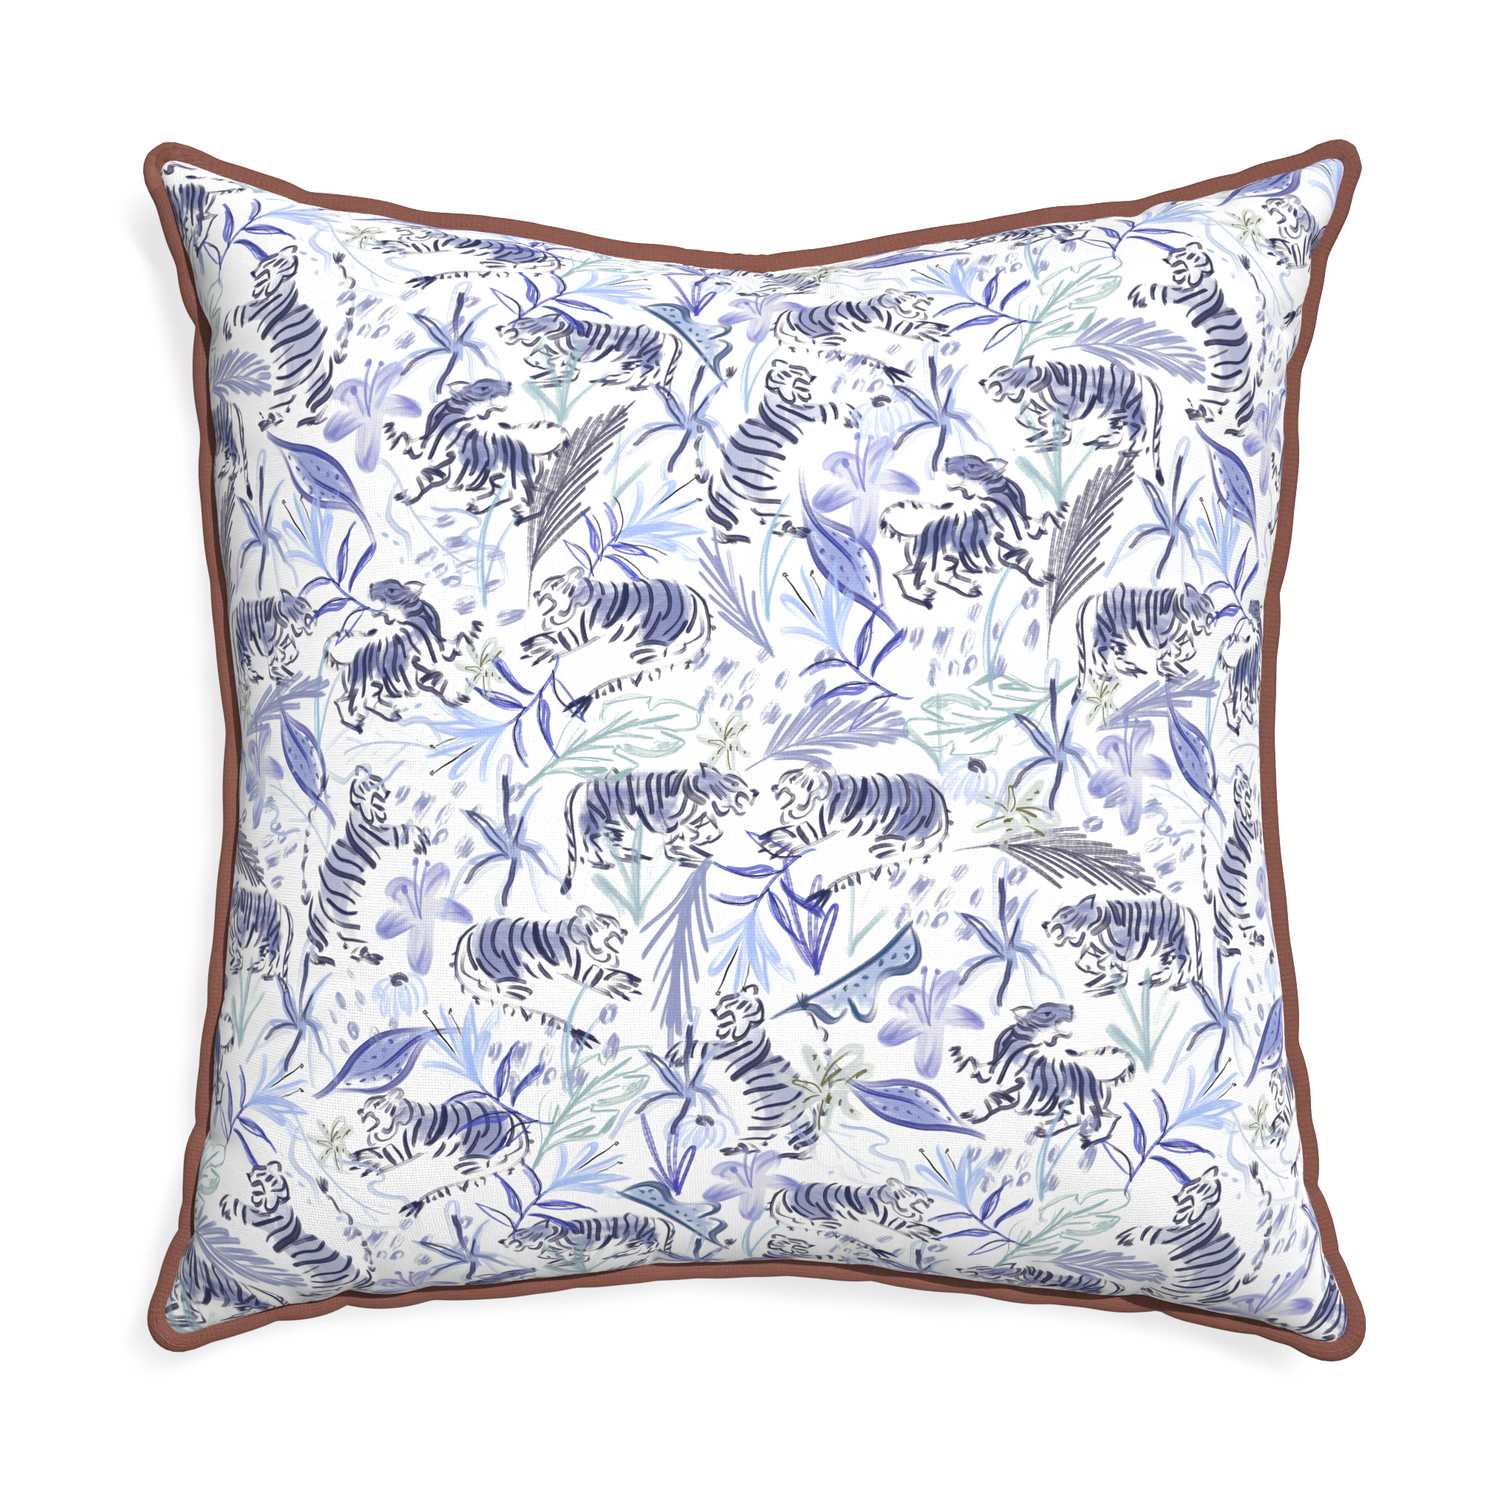 Euro-sham frida blue custom blue with intricate tiger designpillow with w piping on white background